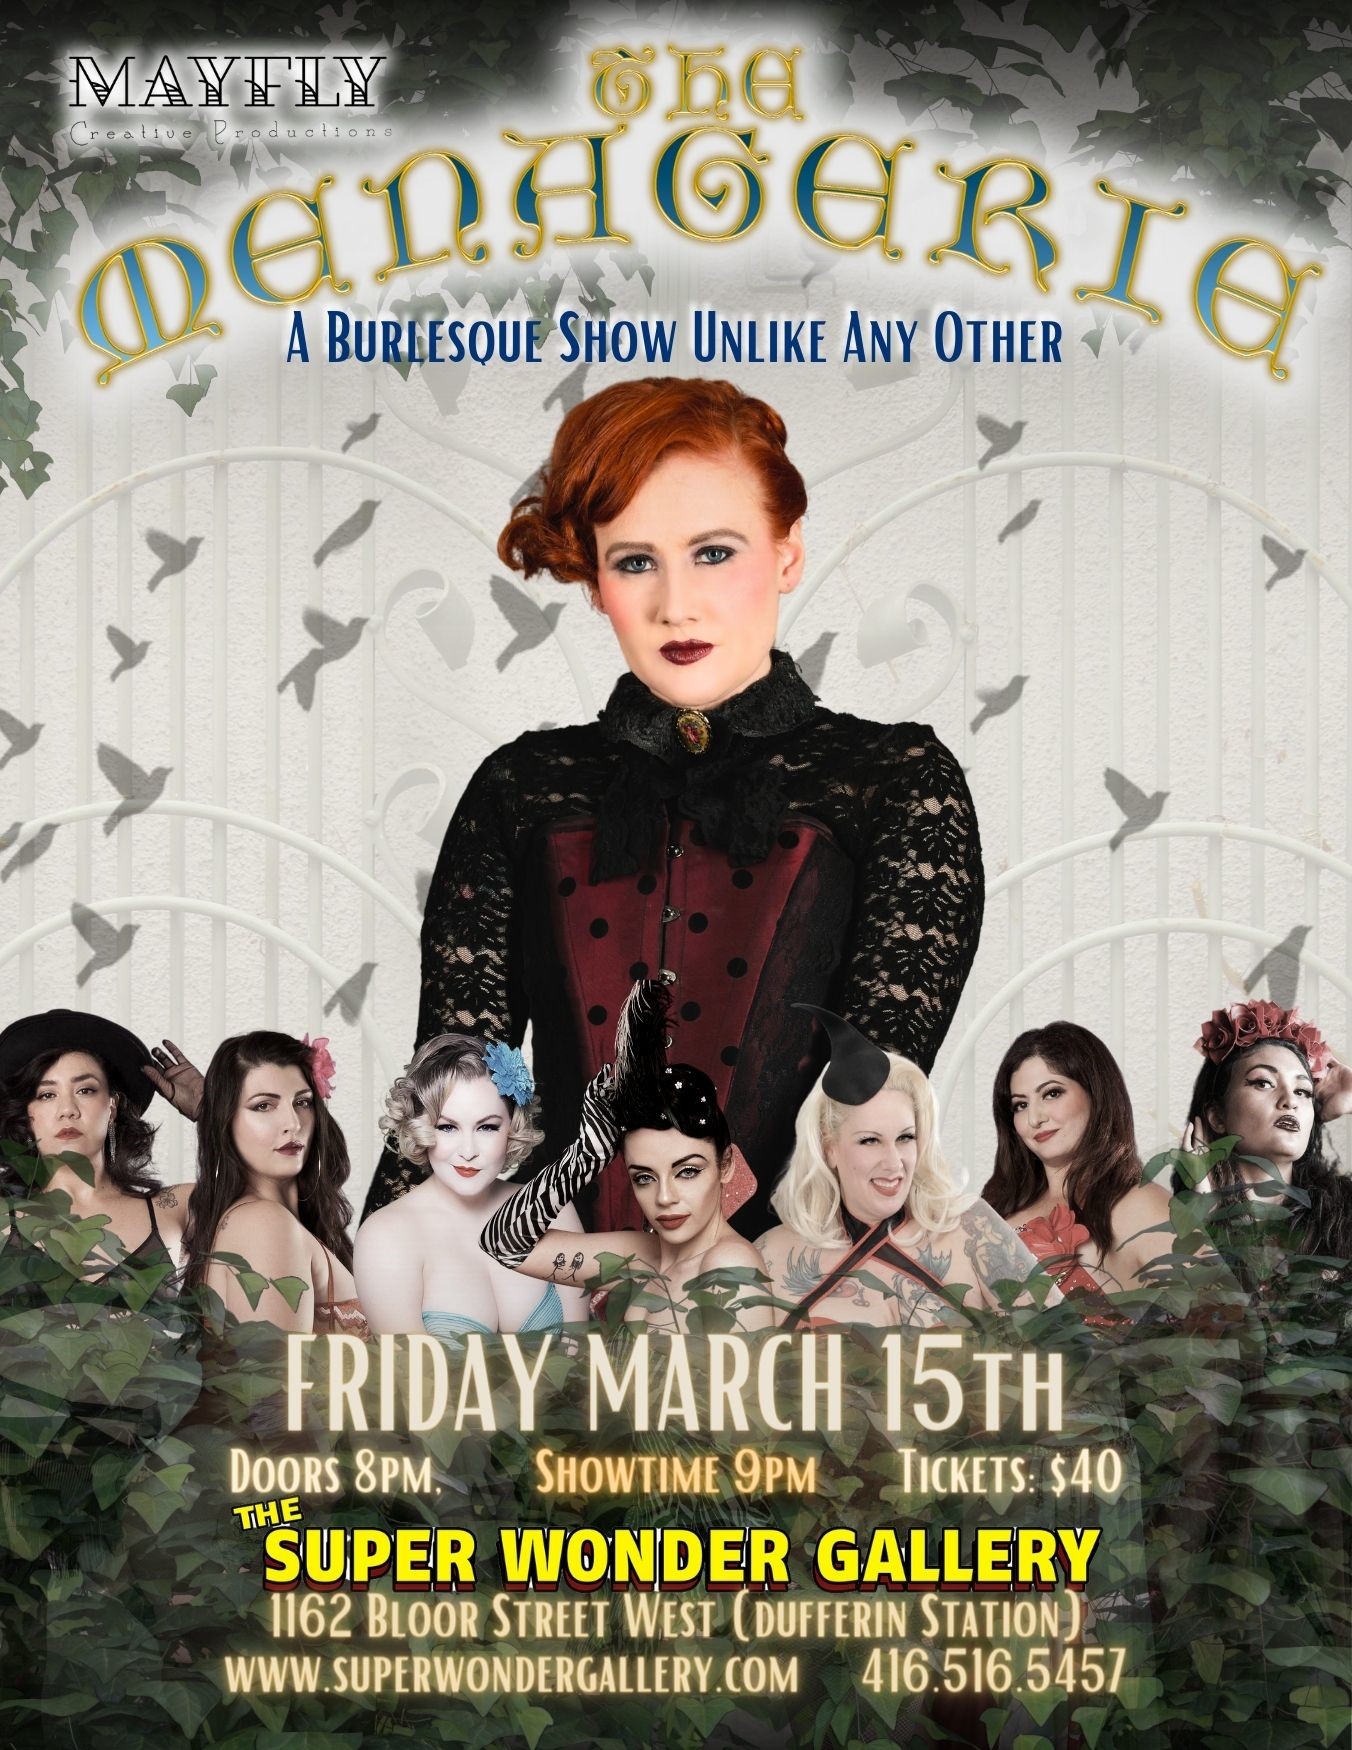 The MENAGERIE A Burlesque Show Unlike Any Other on Mar 15, 20:00@SUPER WONDER GALLERY - Buy tickets and Get information on Super Wonder Gallery 